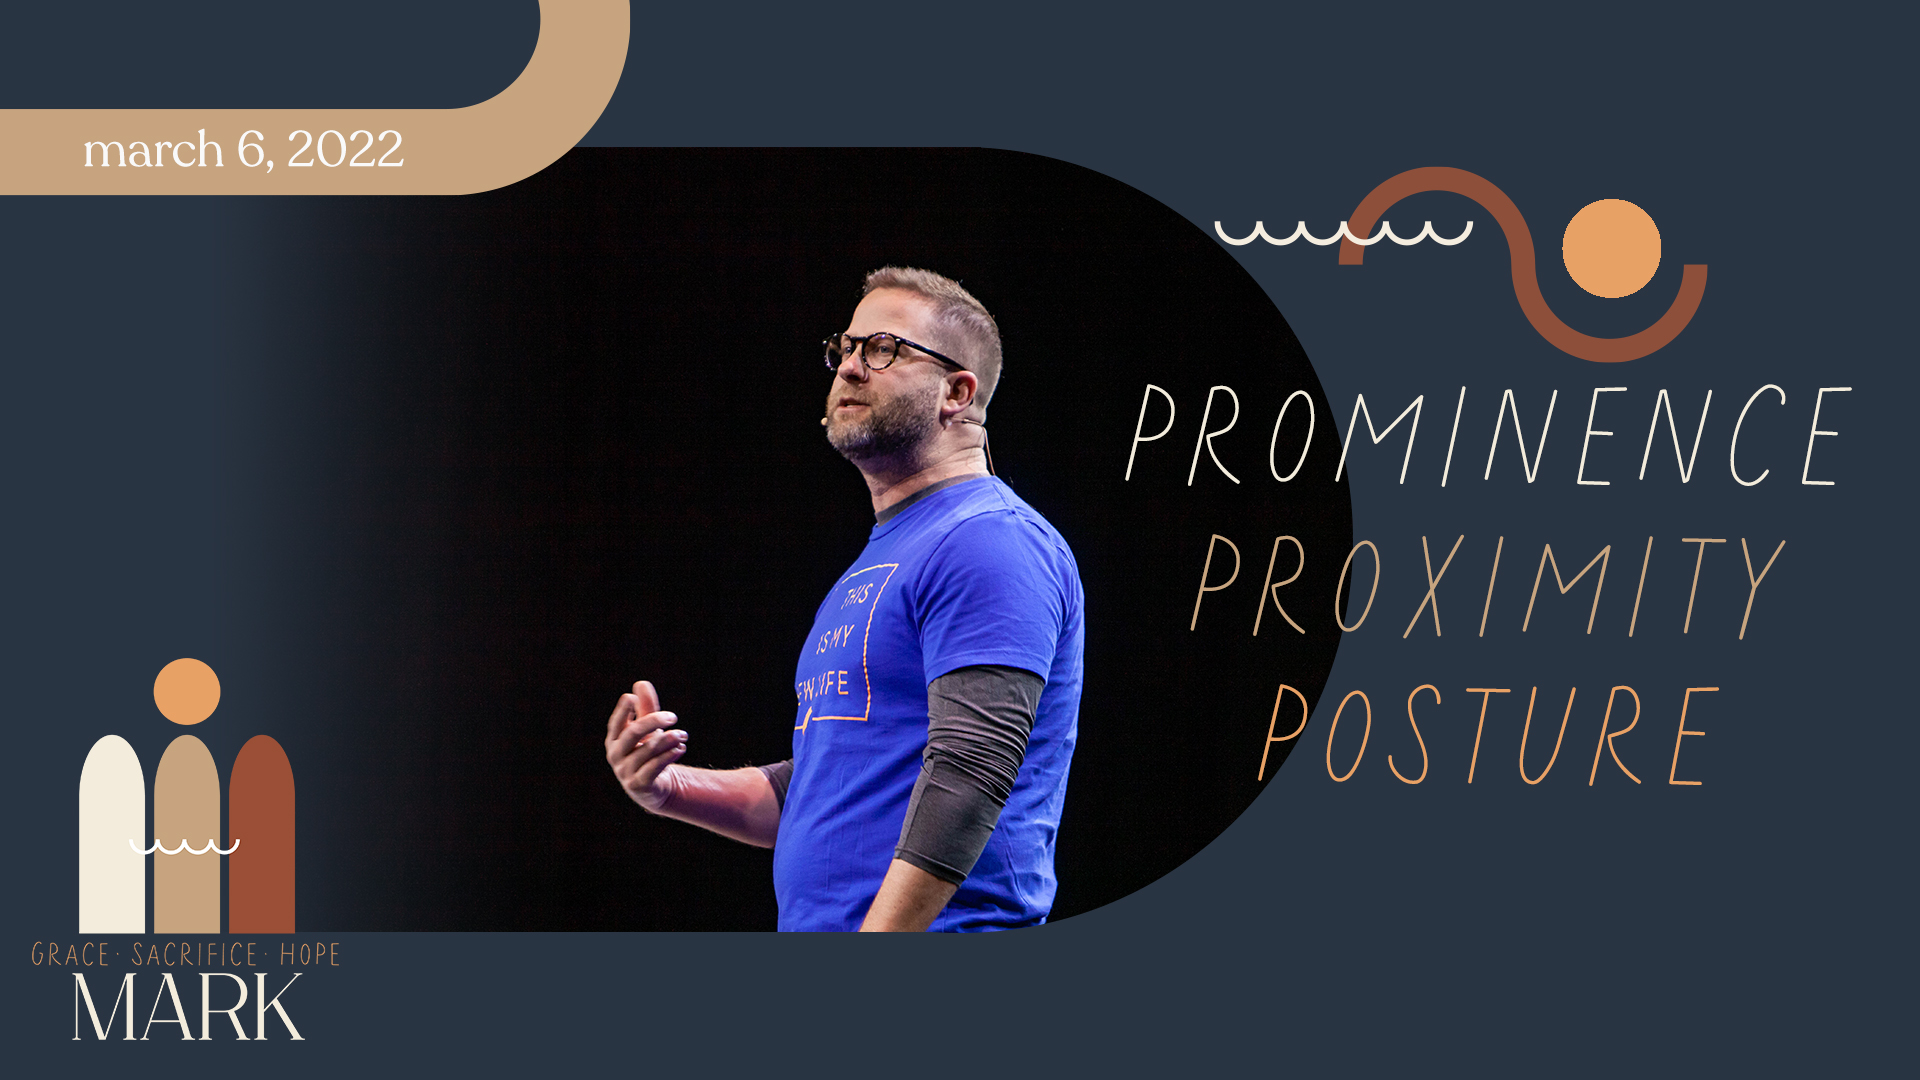 Prominence, Proximity, Posture Image